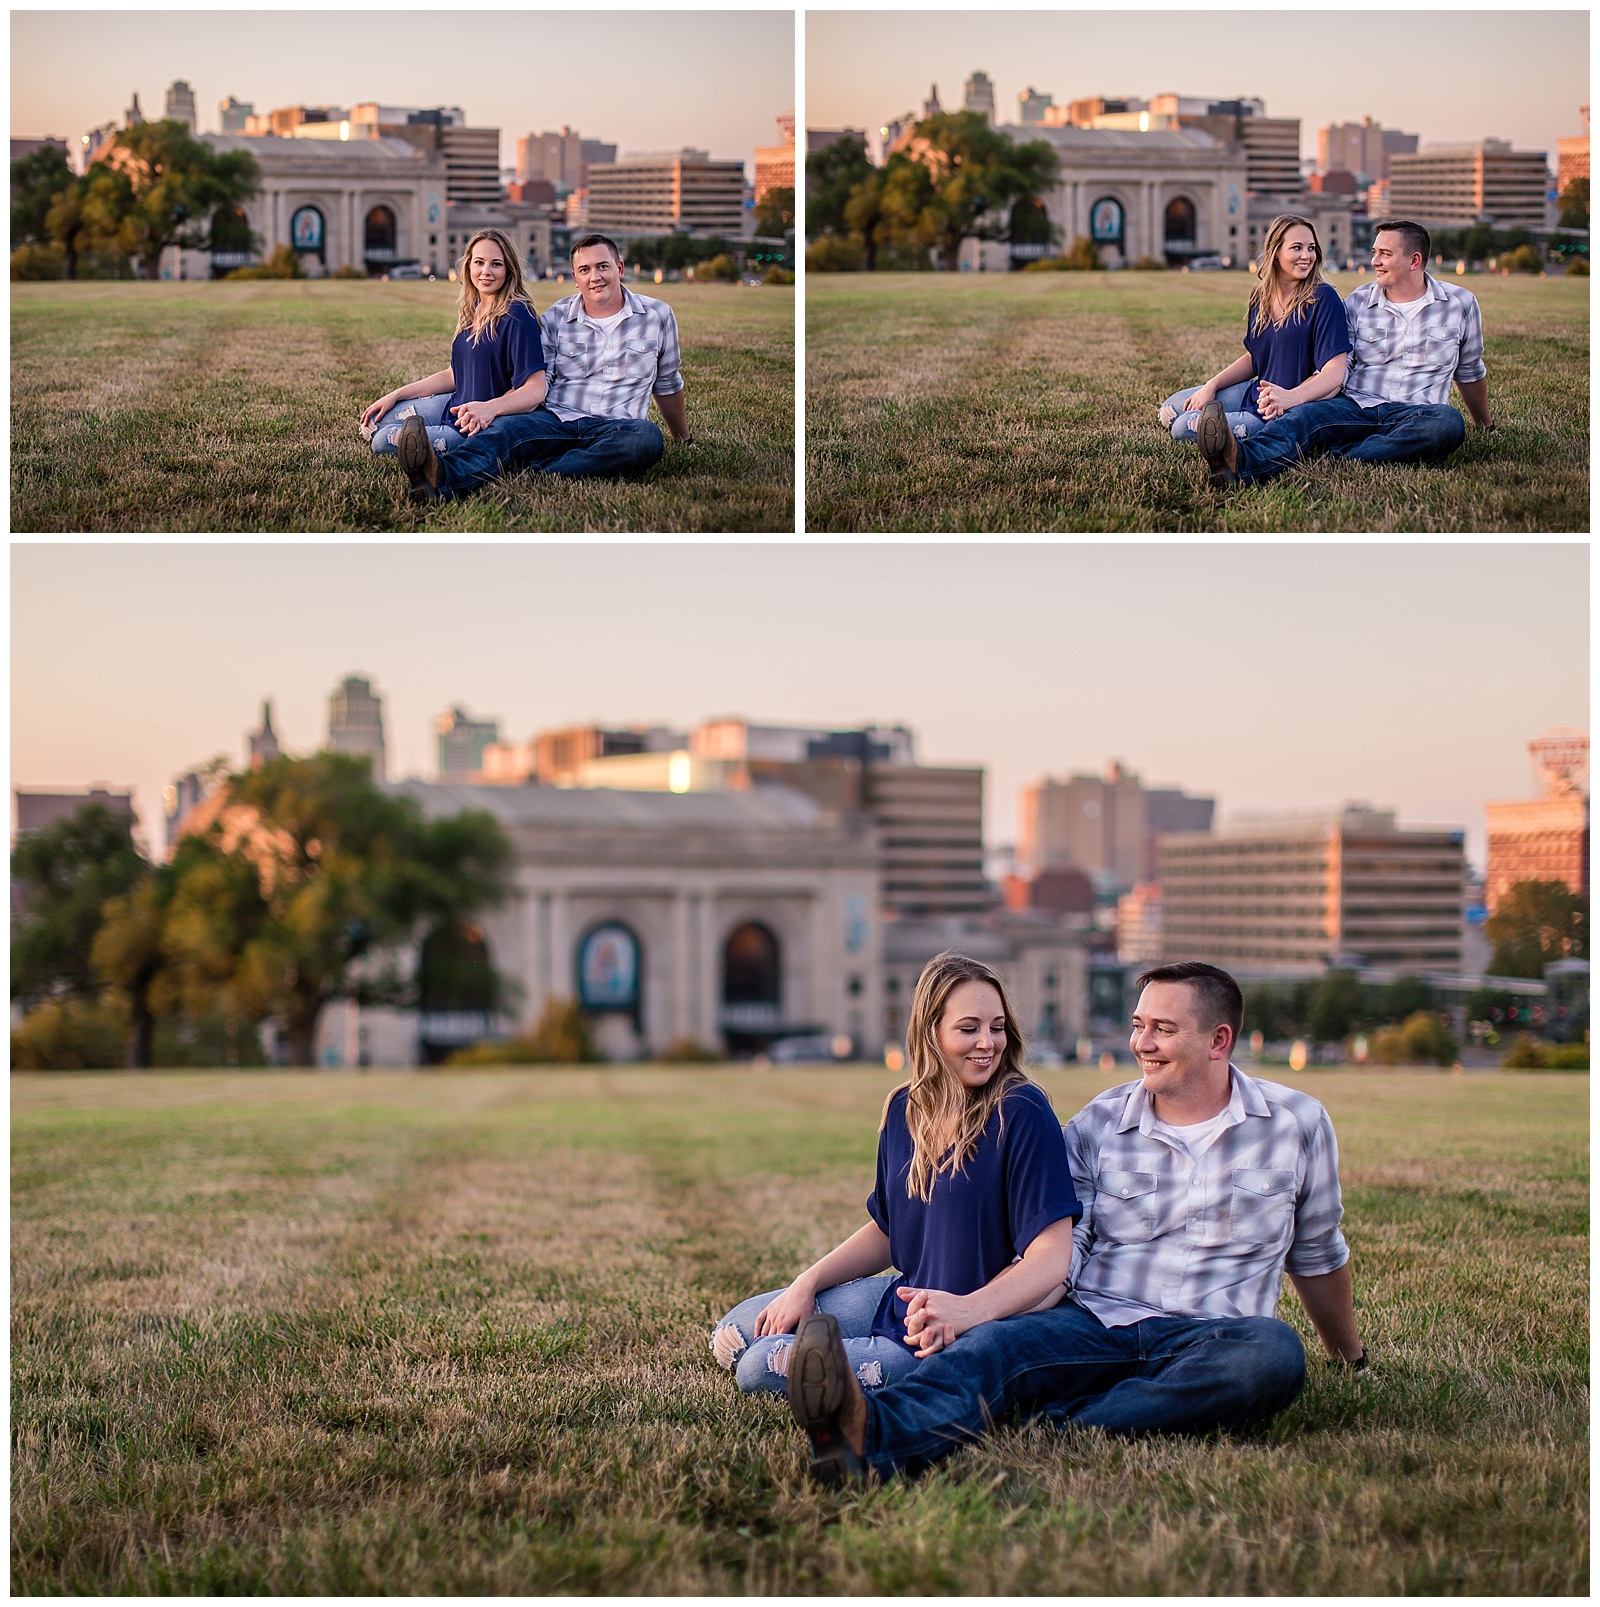 An engagement session at Liberty Memorial in Kansas City.